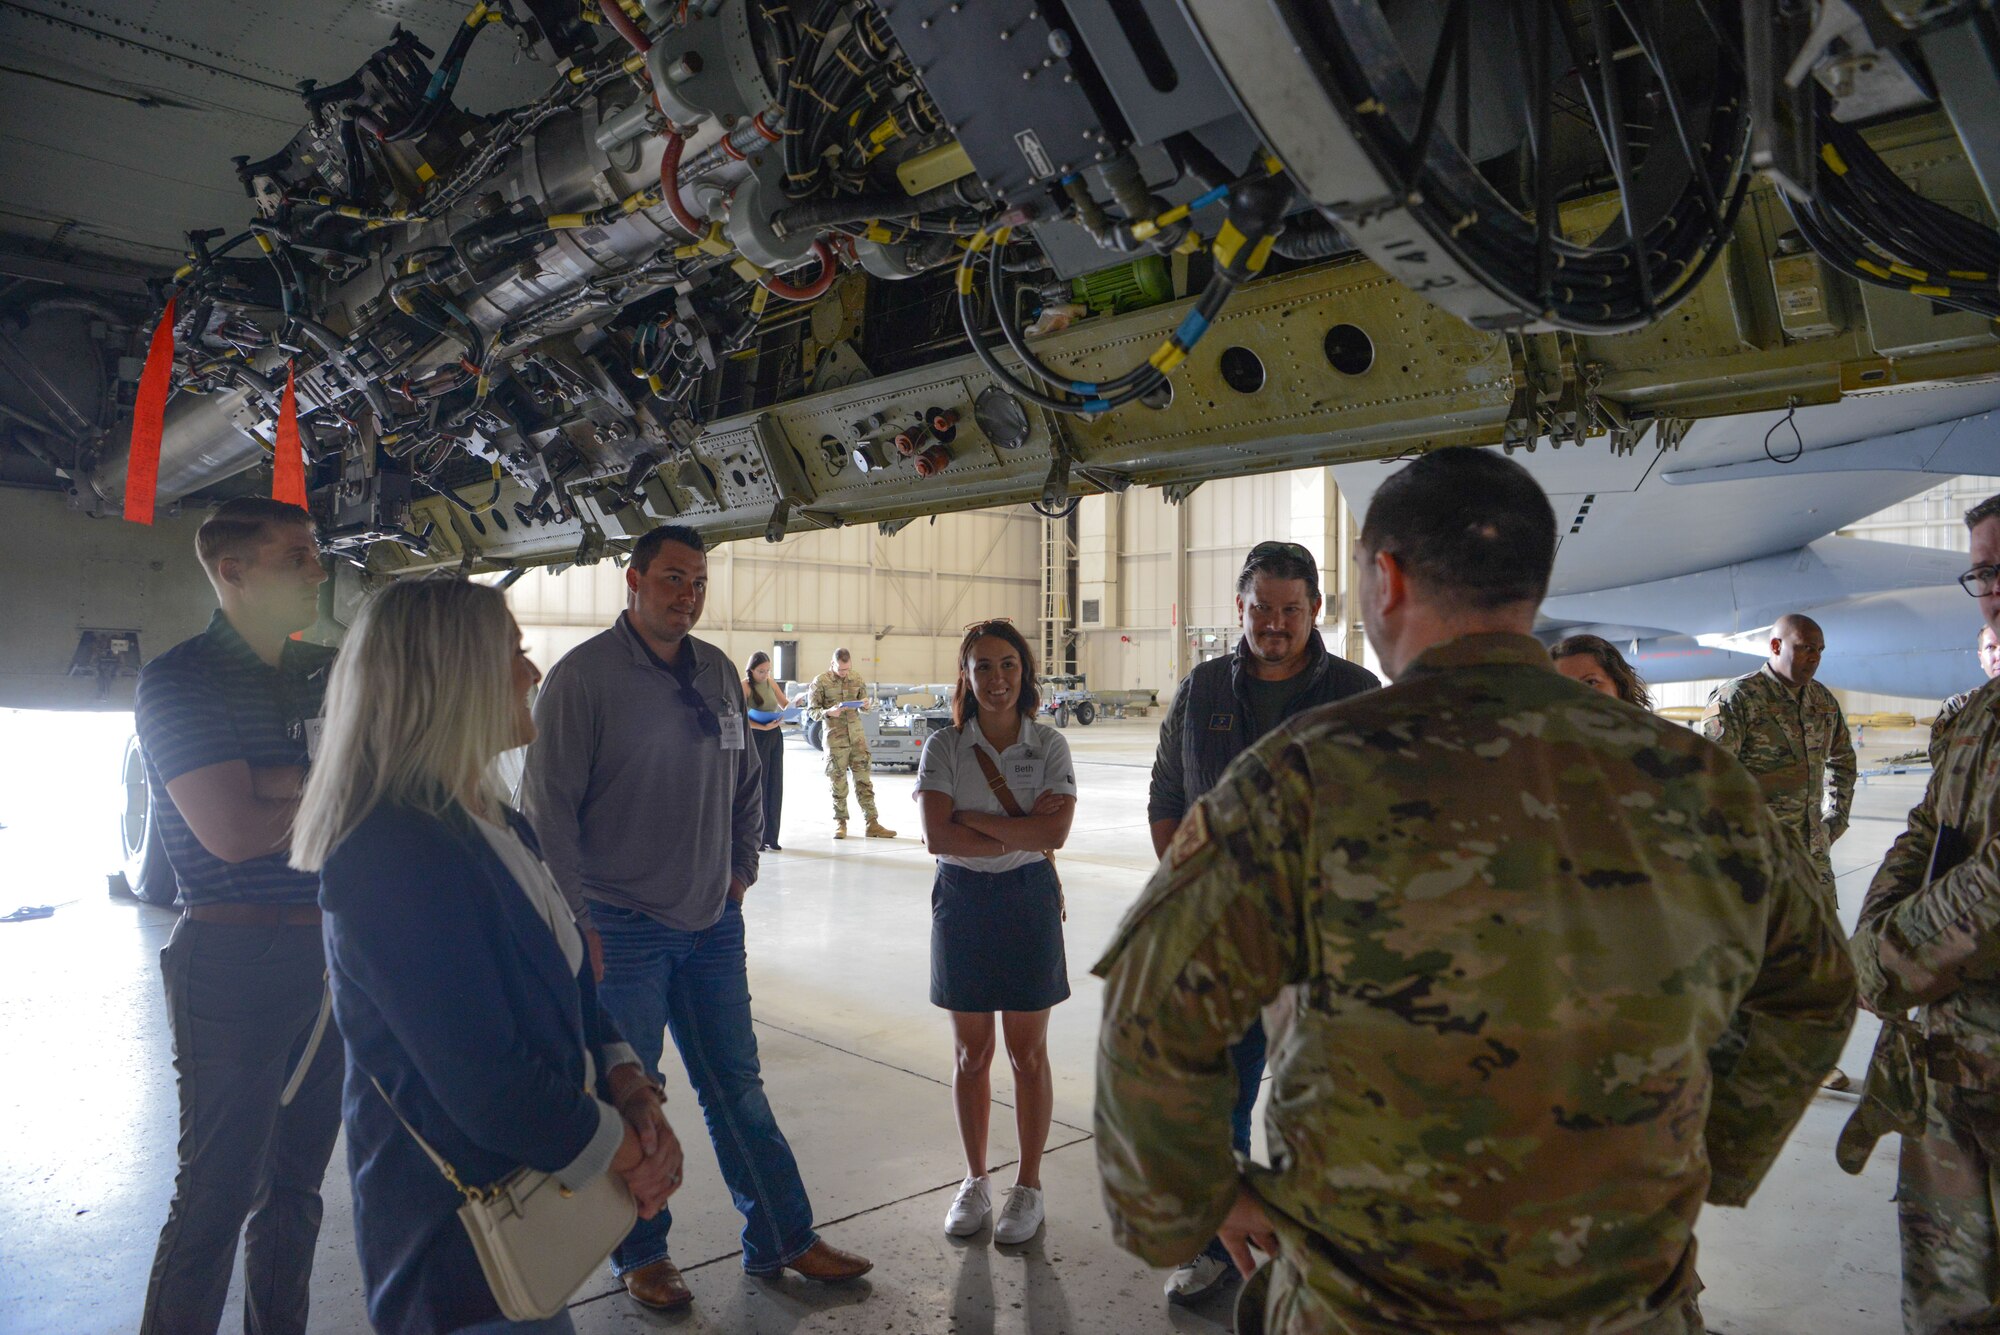 Civilian leaders of Minot tour the underbelly of a B-52H Stratofortress at Minot Air Force Base, North Dakota, July 13, 2023. The B-52H has been assigned to Minot Air Force Base since 1968 and plays a critical role in the 5th Bomb Wing mission with its ability to perform strategic attack, air interdiction, offensive counter-air and maritime operations. (U.S. Air Force photo by Airman 1st Class Trust Tate)